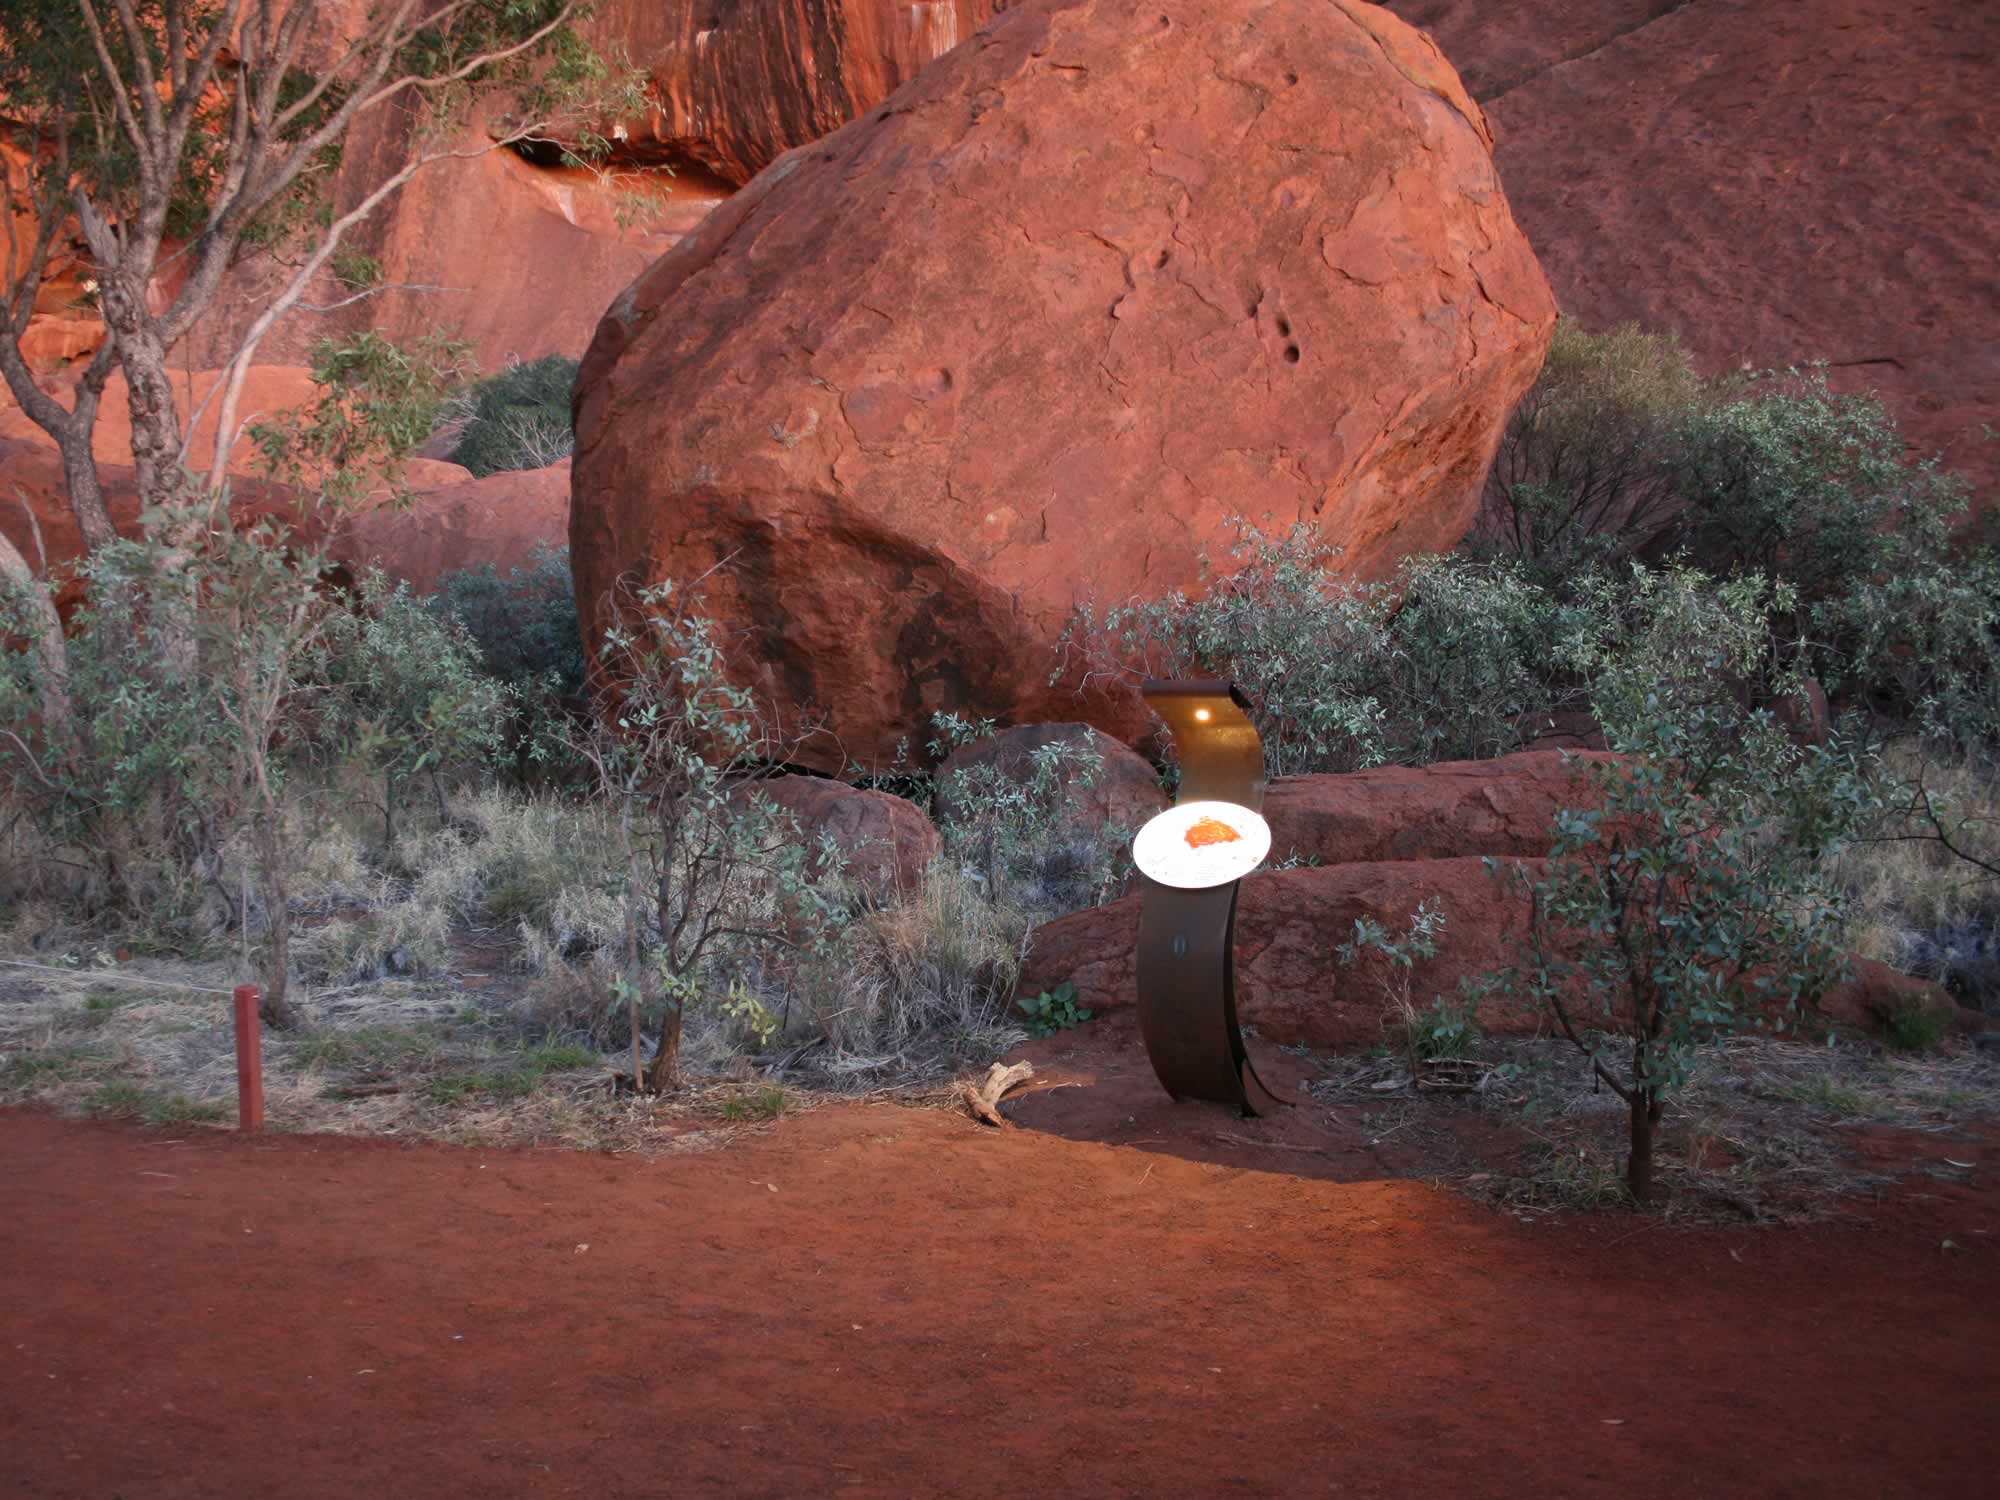 A track maker with a way finding oval map of Uluru. Fixed above the map is a custom designed solar powered LED light, controlled by a micro processor, that turns the light on automatically at dusk for two hours only and then two hours prior to sunrise.